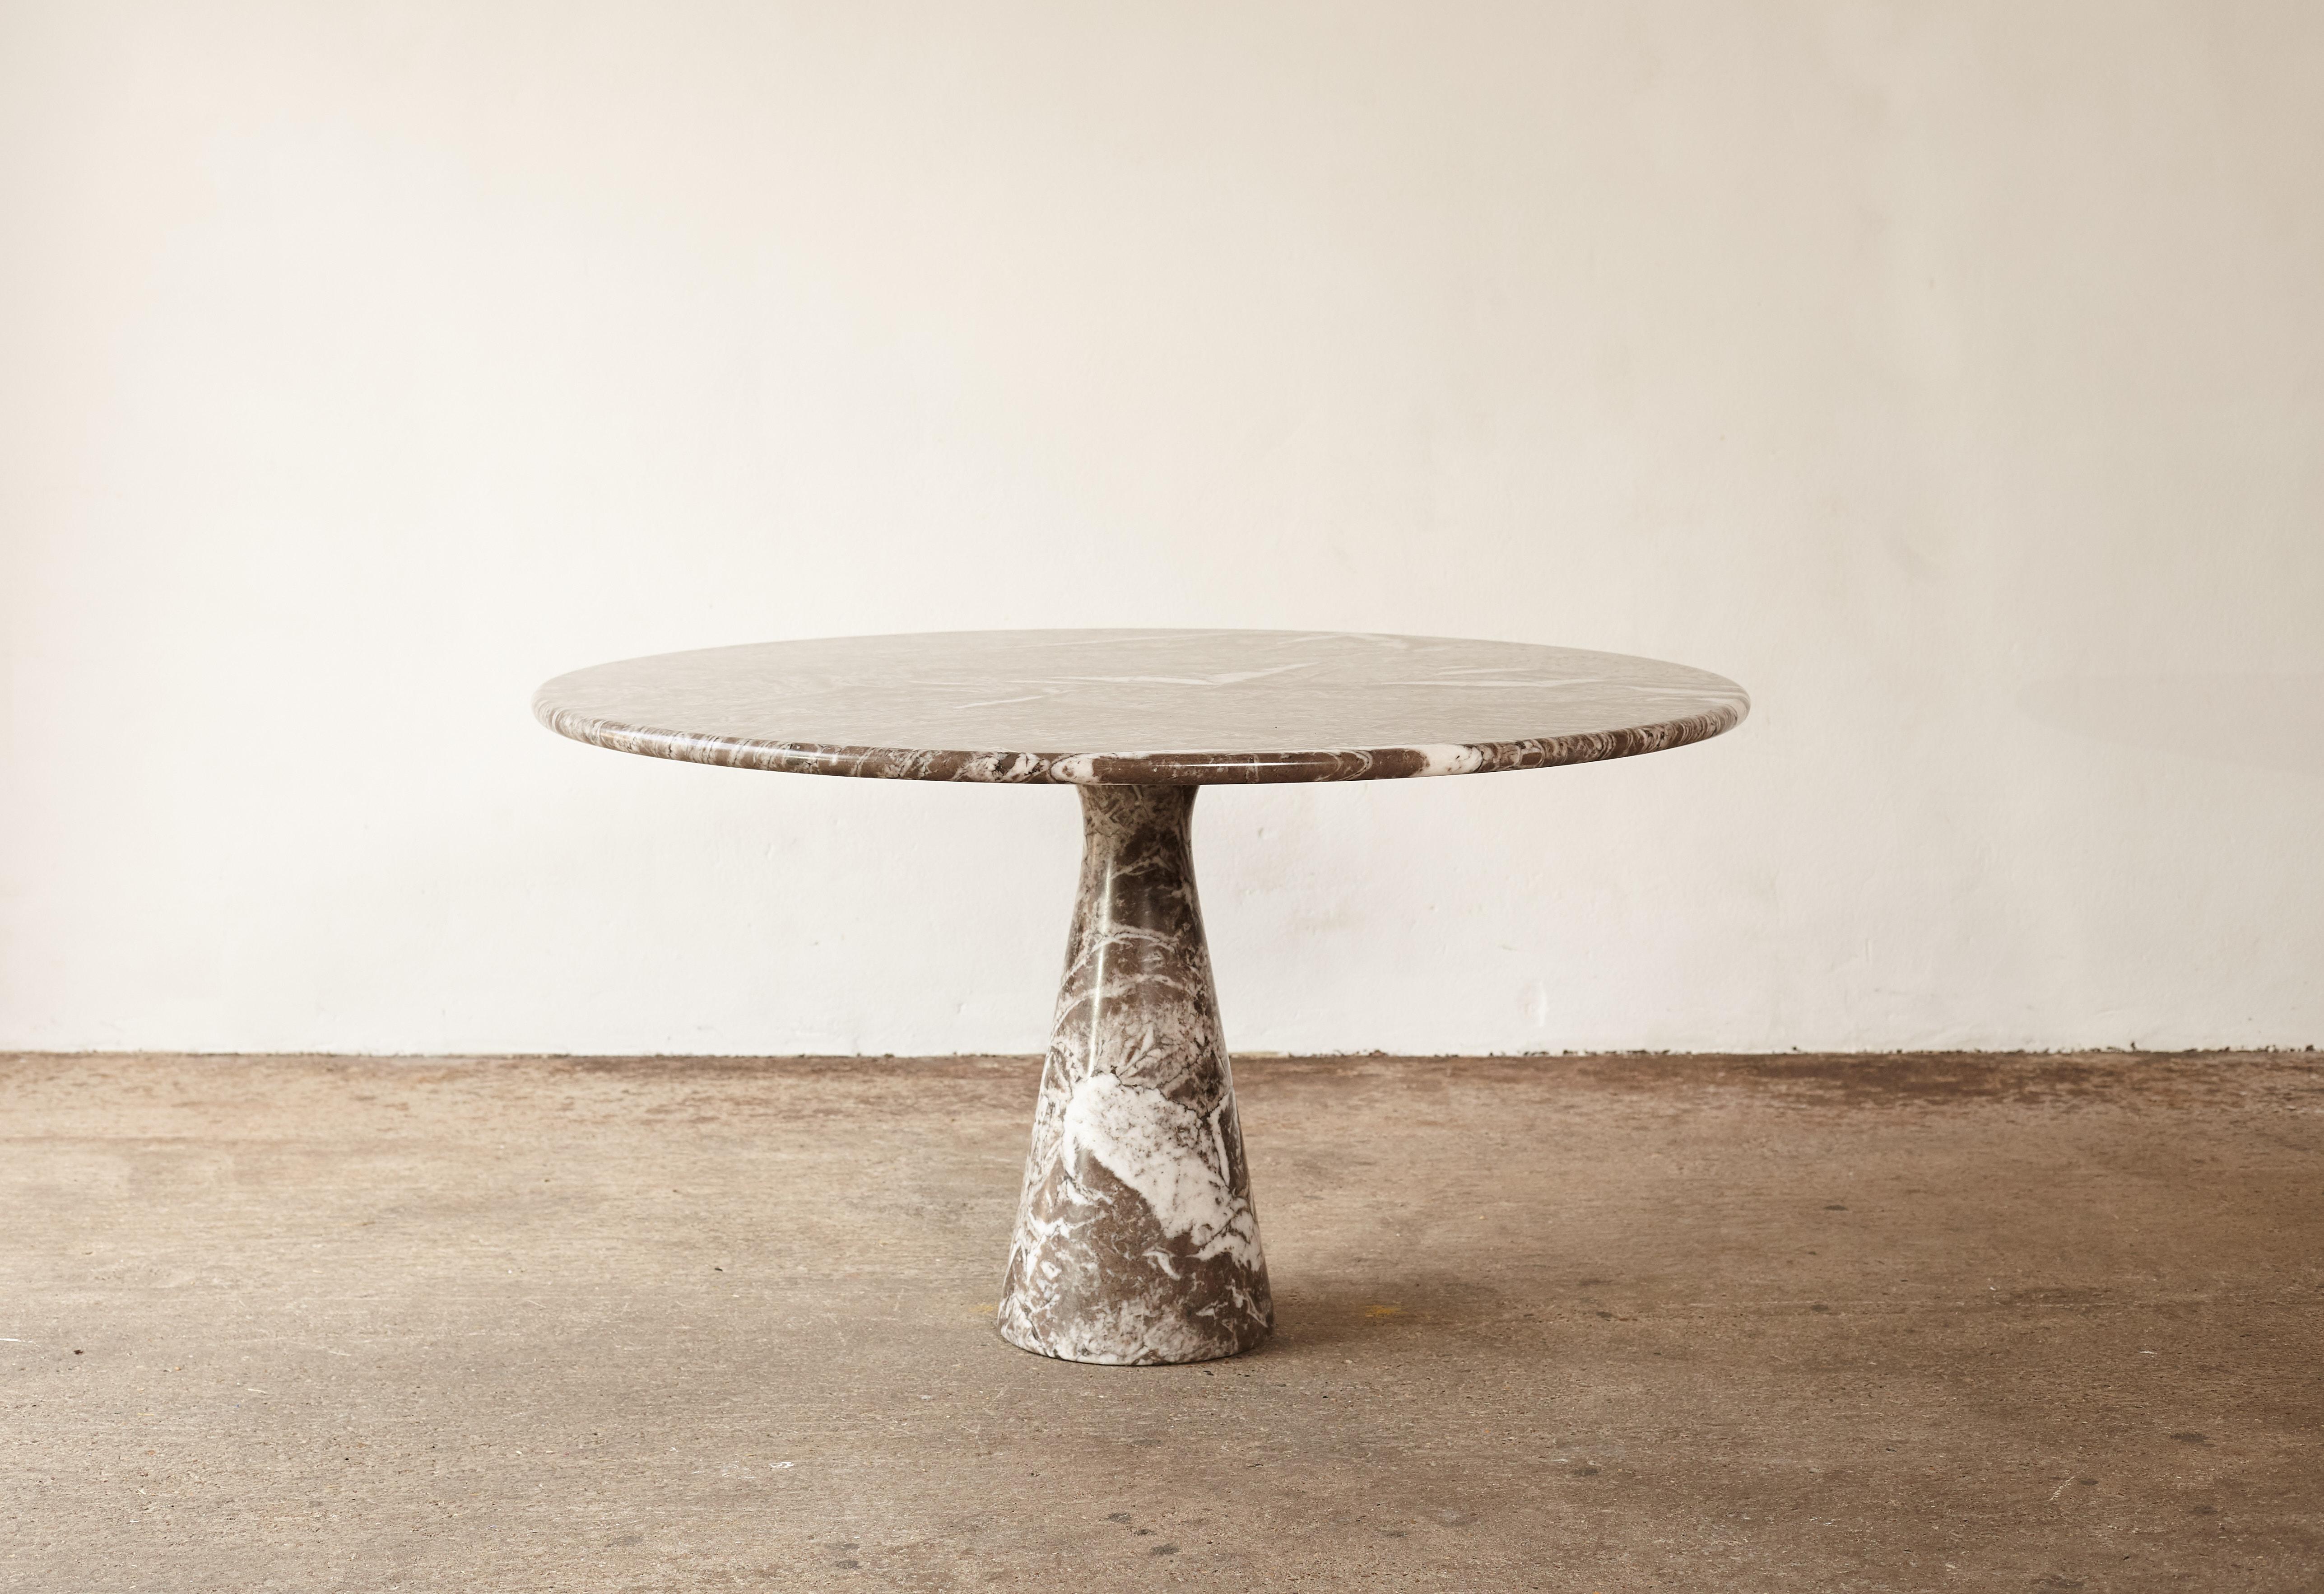 A stunning Angelo Mangiarotti round marble T70 dining table for Skipper, Italy in 1969. Grey/brown and white marble with wonderful character. Ships worldwide.




Lit: Giuliana Gramigna, Repertorio del design Italiano 1950-2000, Vol.1, p.